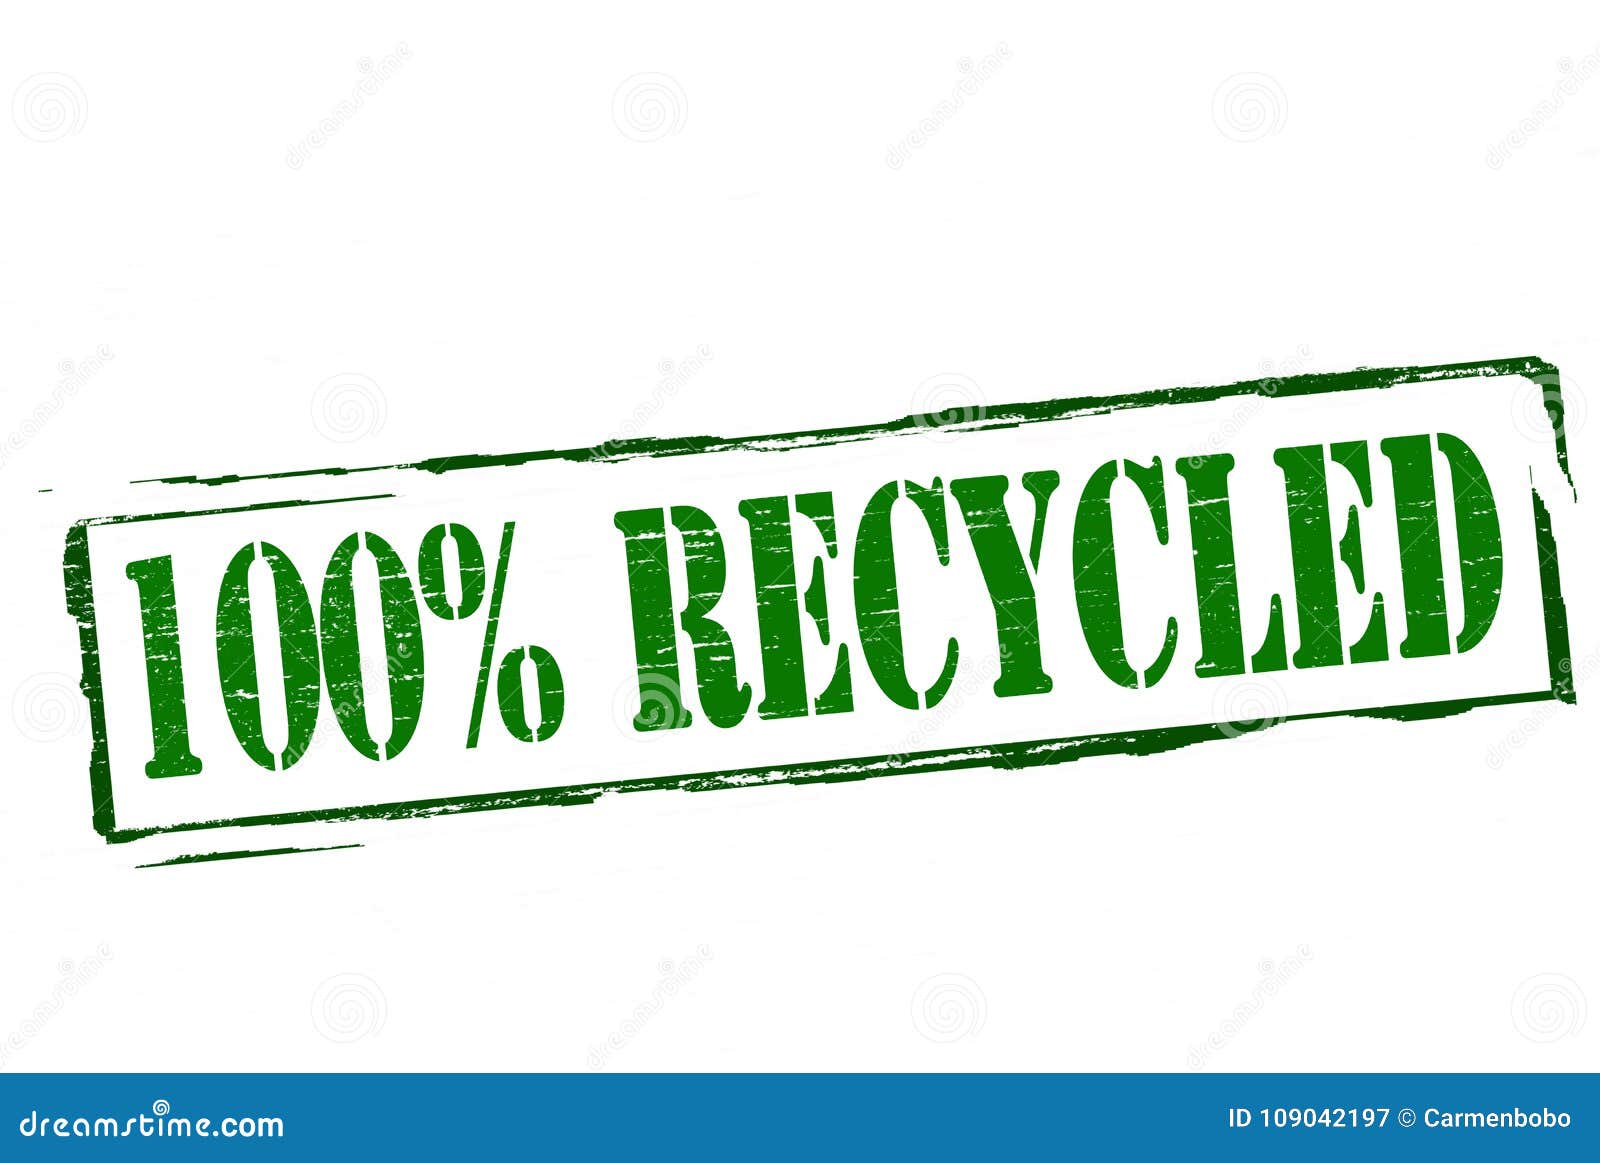 one hundred percent recicled